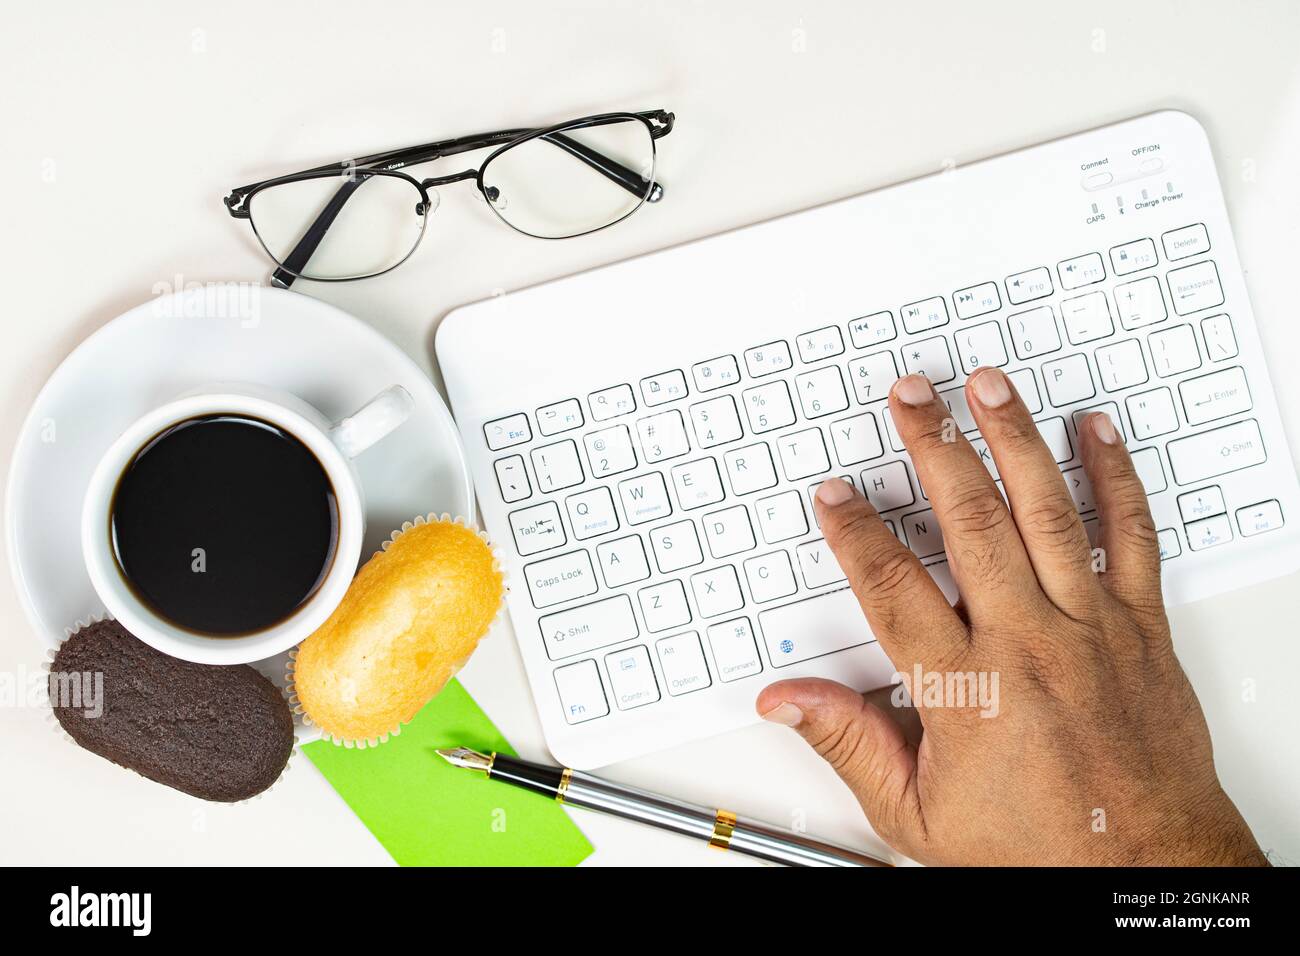 Working from home concept. Hand typing, muffins, pen, notes, spectacles with a cup of coffee. Selective focus points Stock Photo